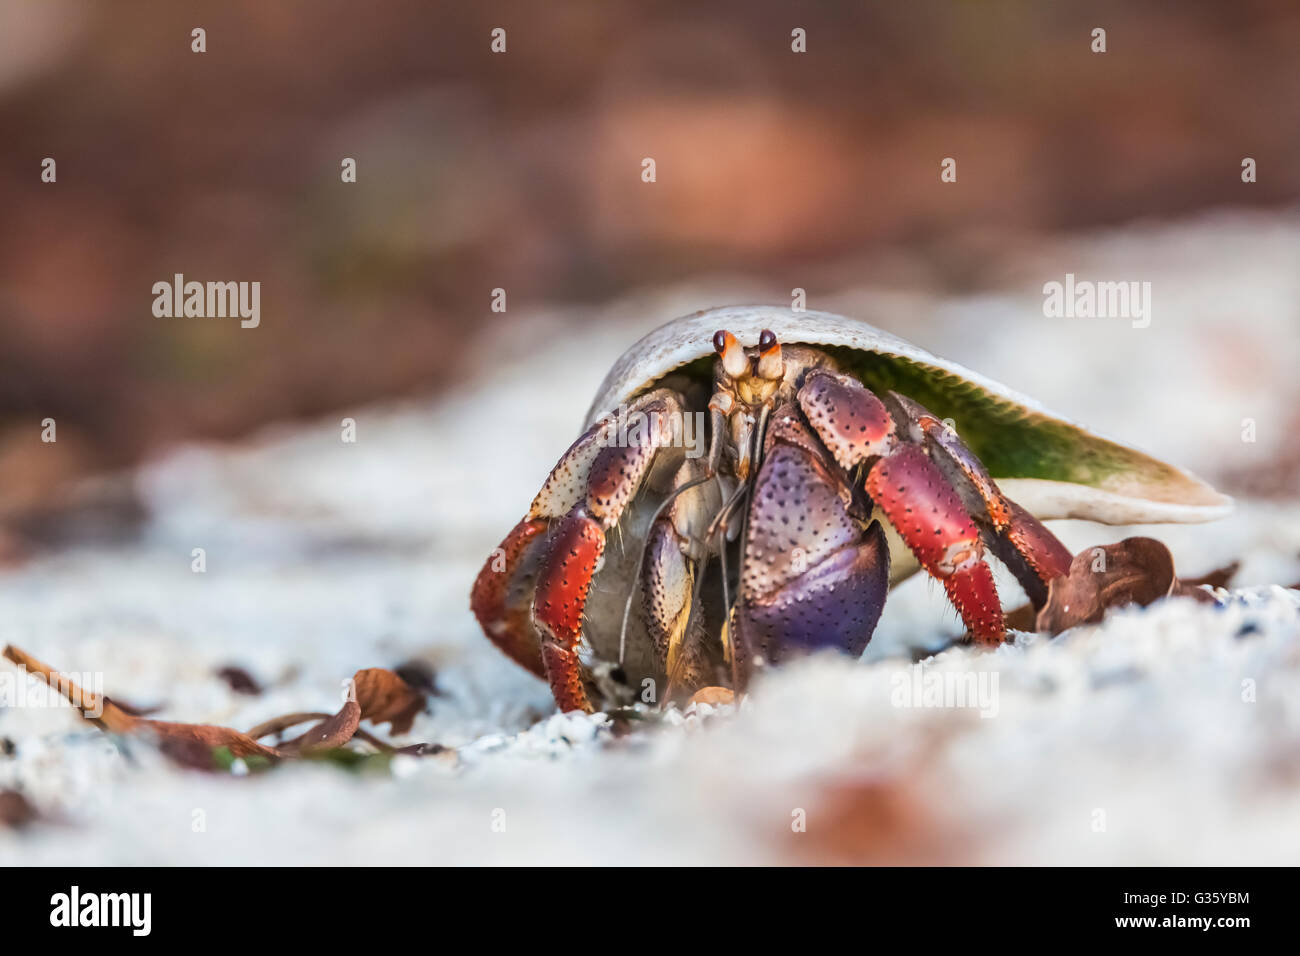 Carribean Hermit Crab, Coenobita clypeatus, foraging in its appropriated whelk shell, Dry Tortugas National Park, Florida, USA Stock Photo